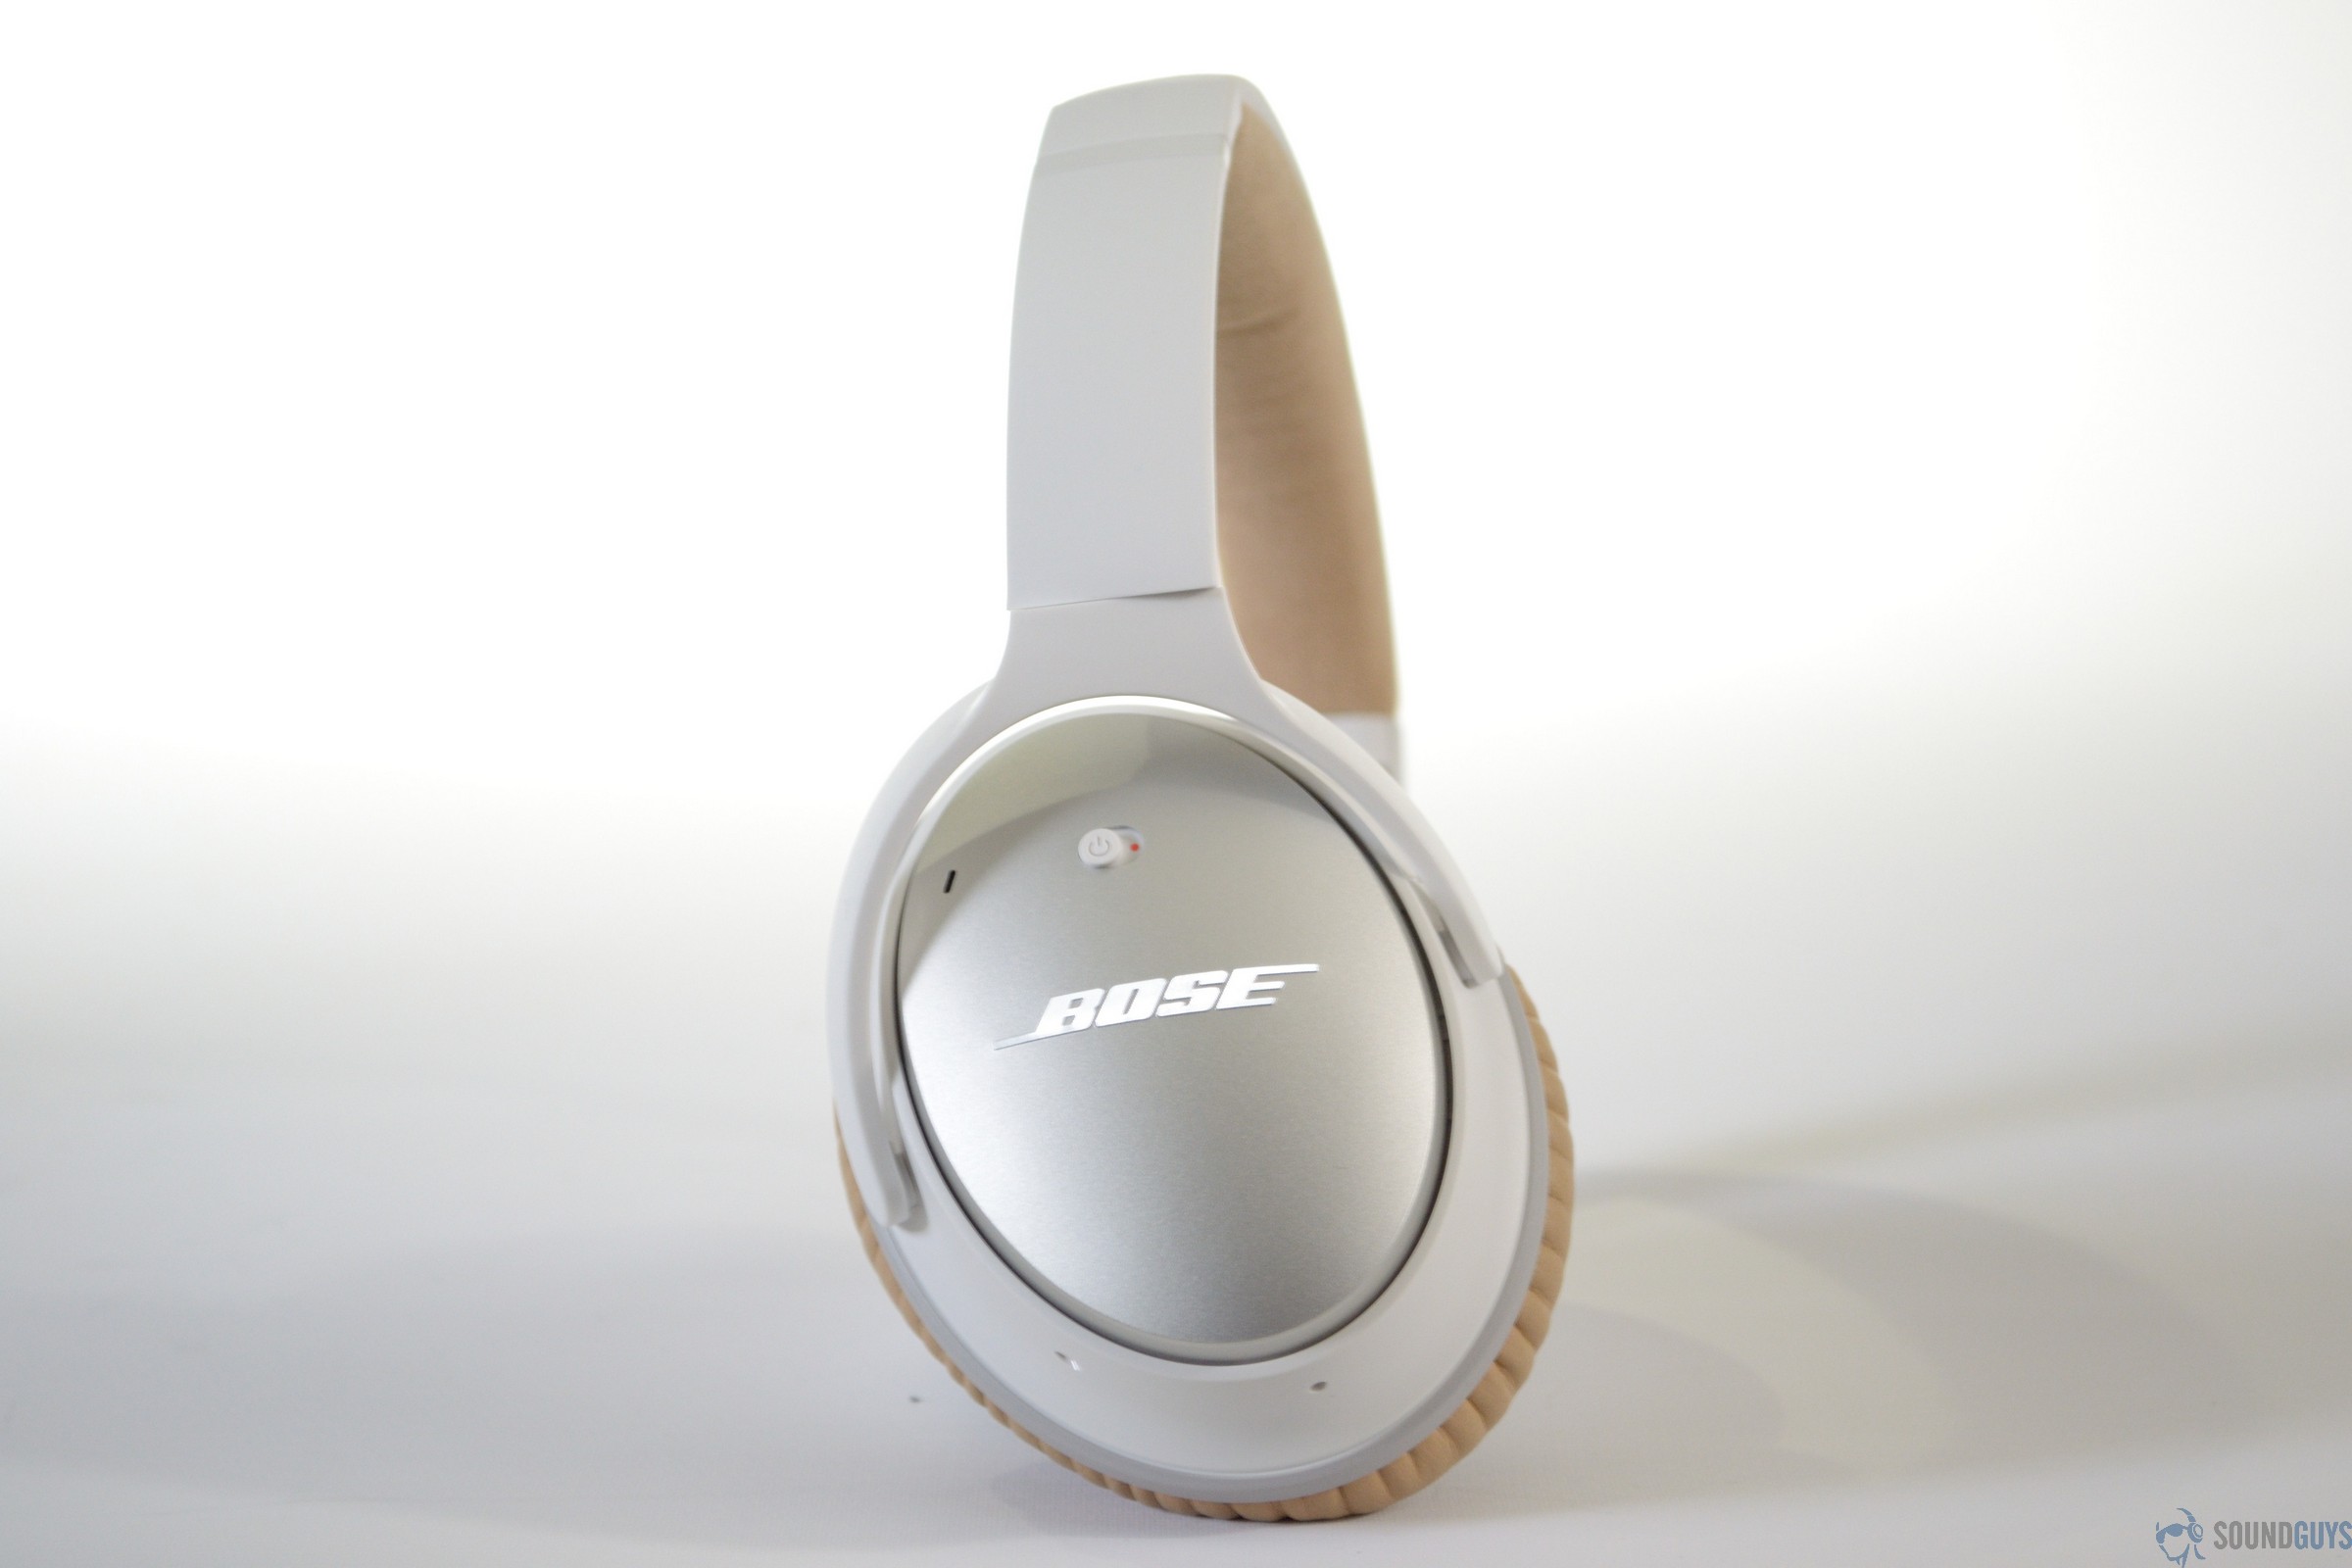 A photo of the side of the Bose QuietComfort 25.